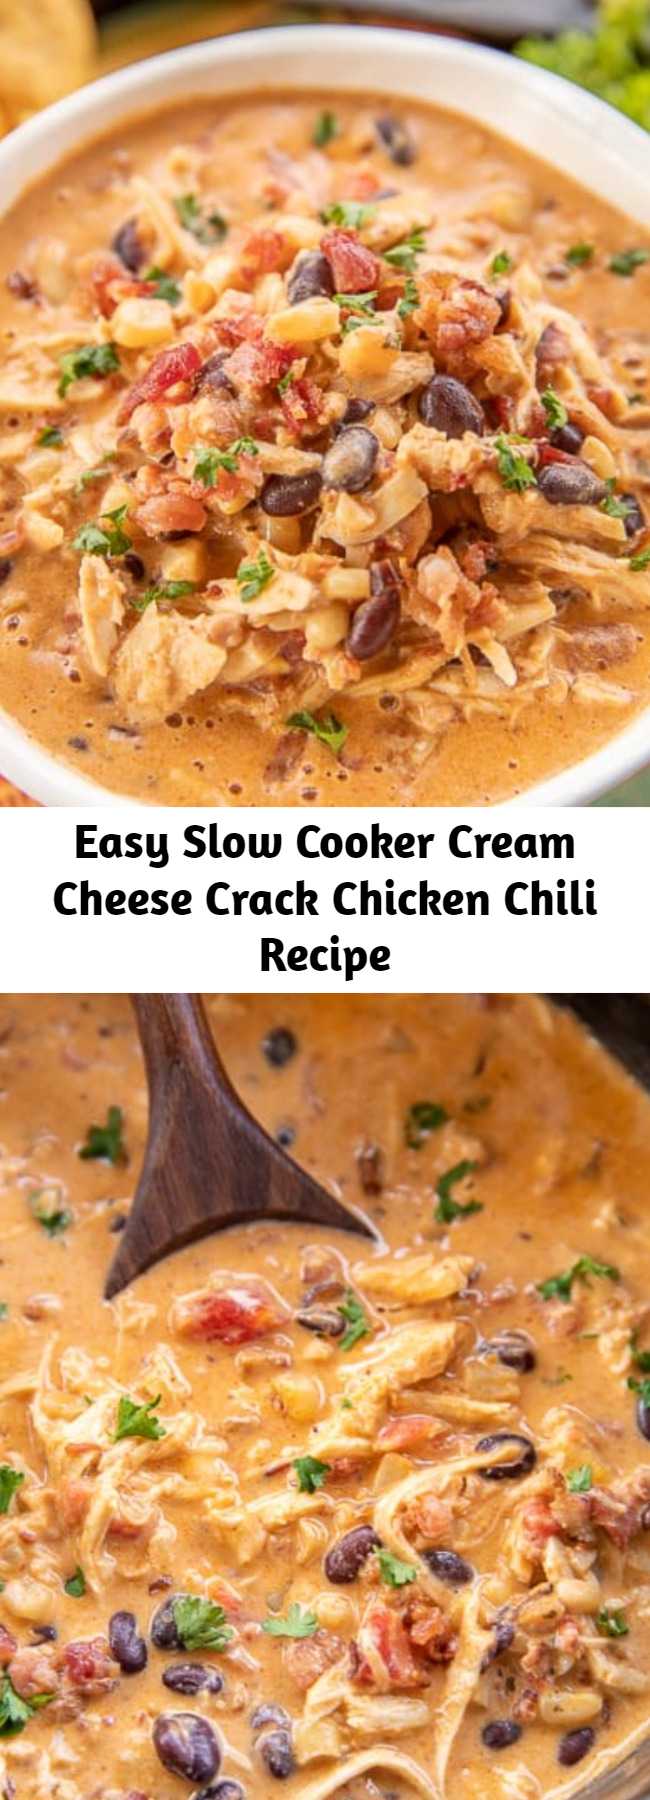 Easy Slow Cooker Cream Cheese Crack Chicken Chili Recipe - this stuff is AMAZING! We’ve made it 3 times this month! We can’t get enough of it!!! Chicken, corn, black beans, chicken broth, diced tomatoes and green chiles, cumin, chili powder, onion, ranch seasoning, bacon and cheddar cheese. We served the chili with some cornbread and Fritos. PERFECT! This is already on the menu again this weekend! YUM! #crockpot #slowcooker #chili #chickenchili